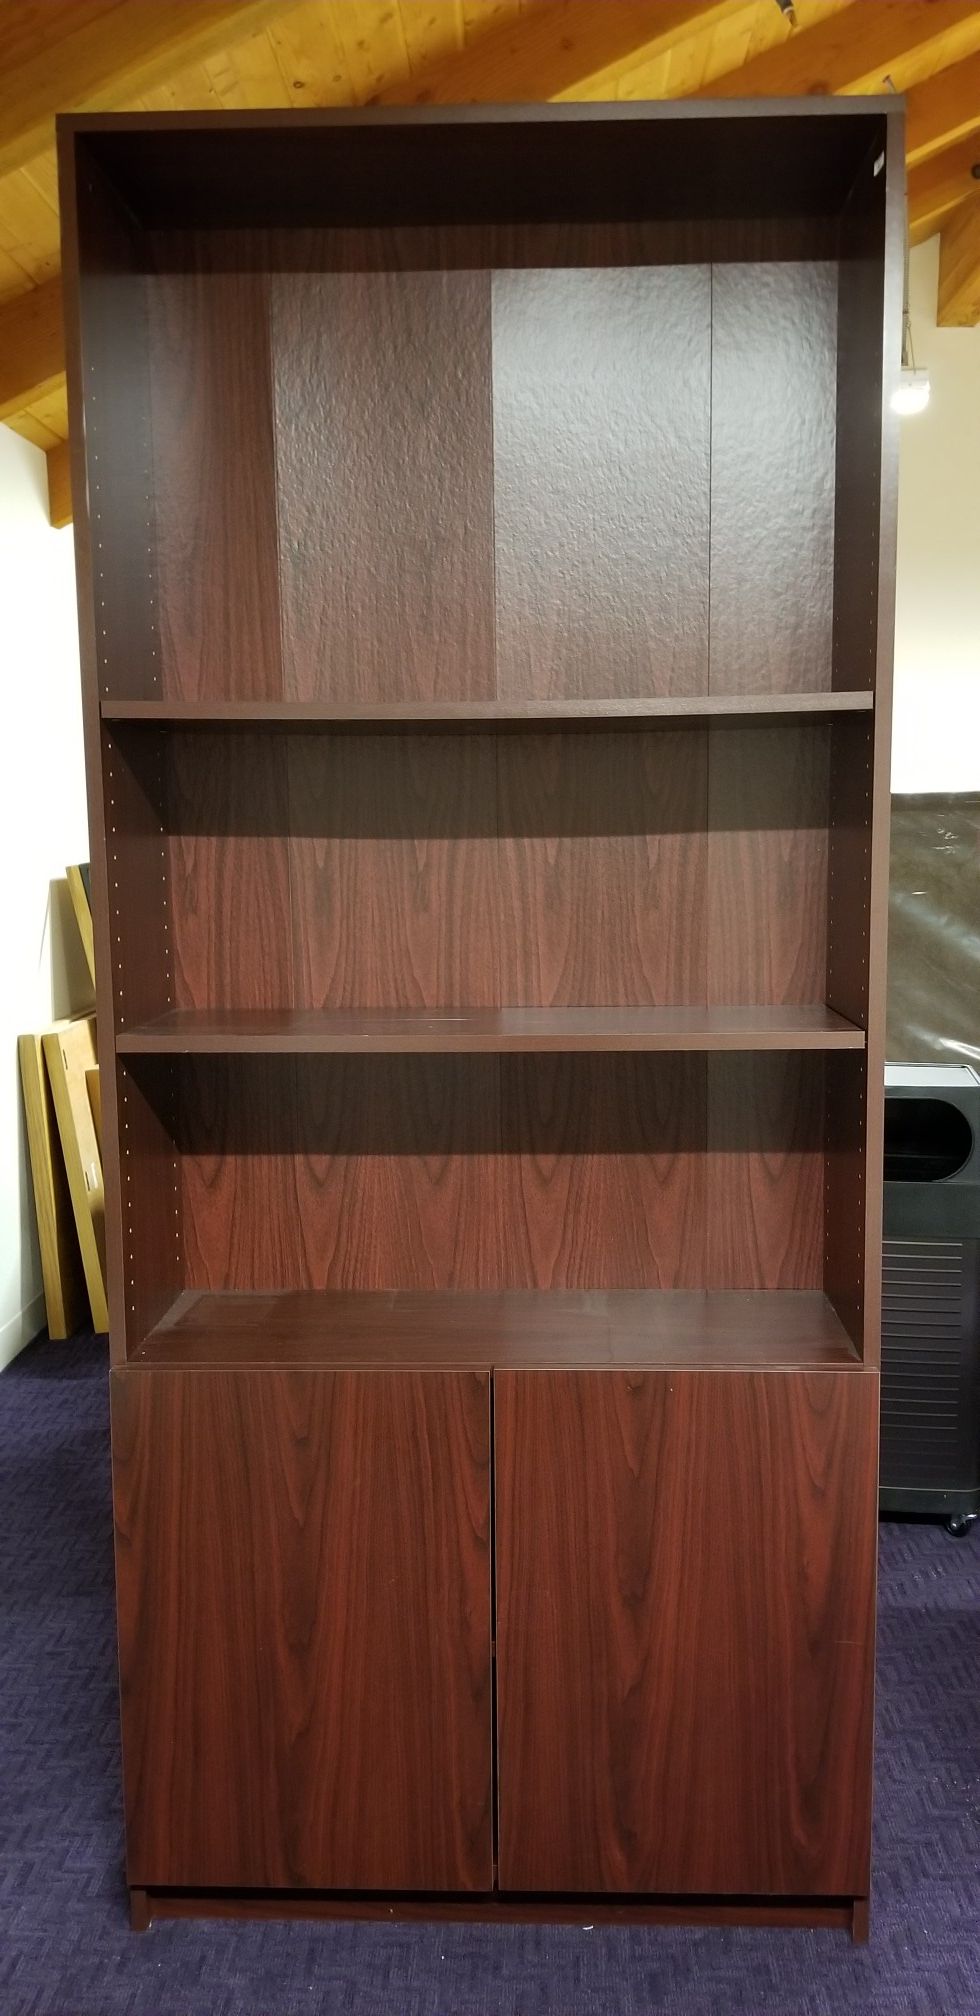 Cherry wood book shelf with cabinet